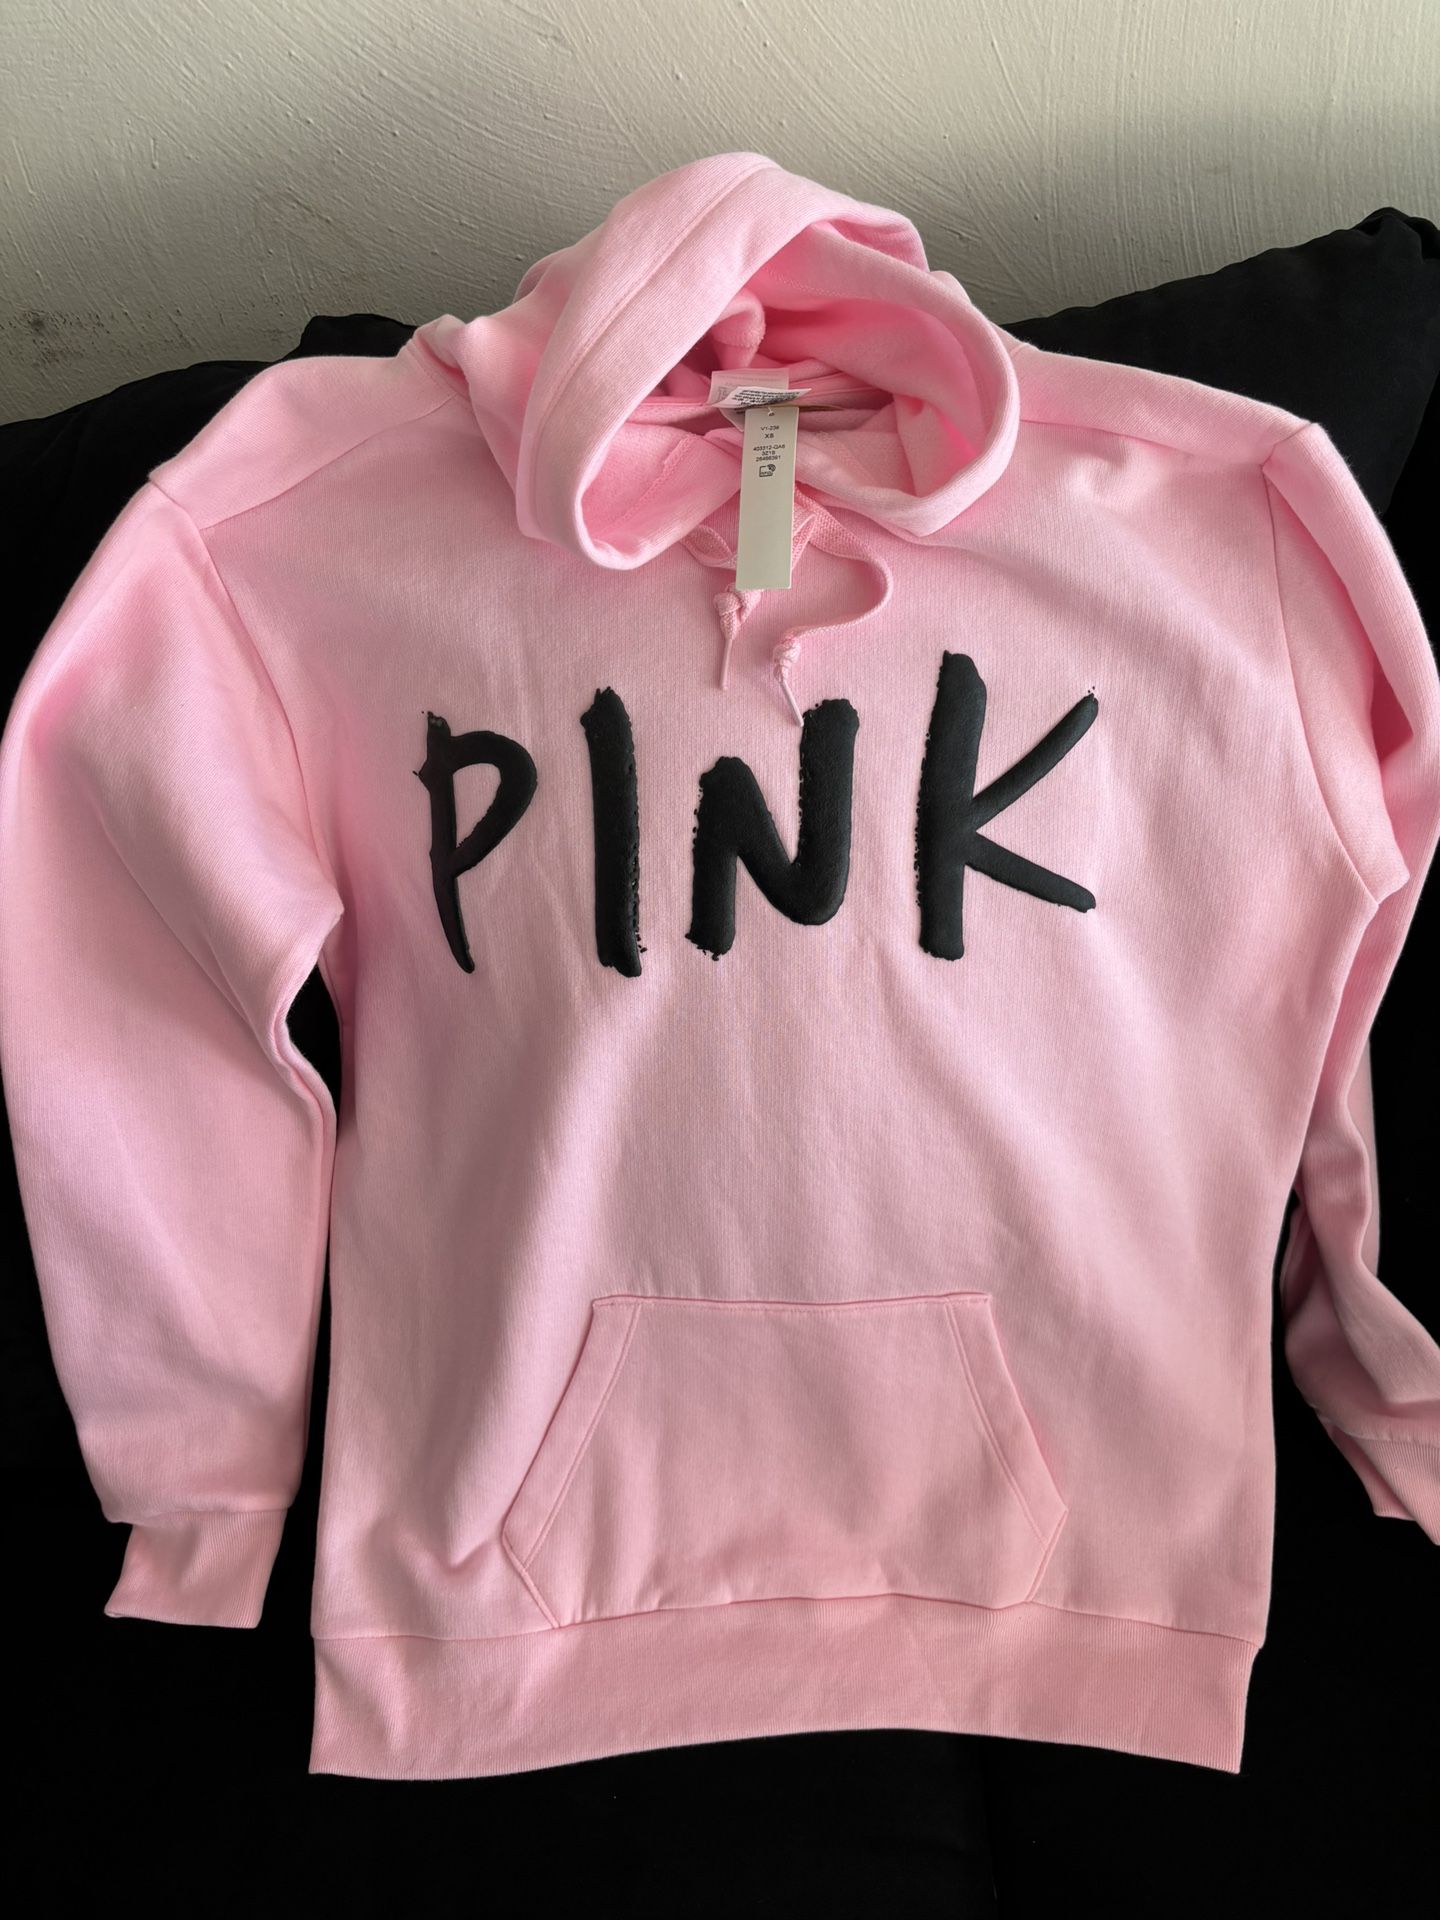 Pink Hoodie (size Xsmall)